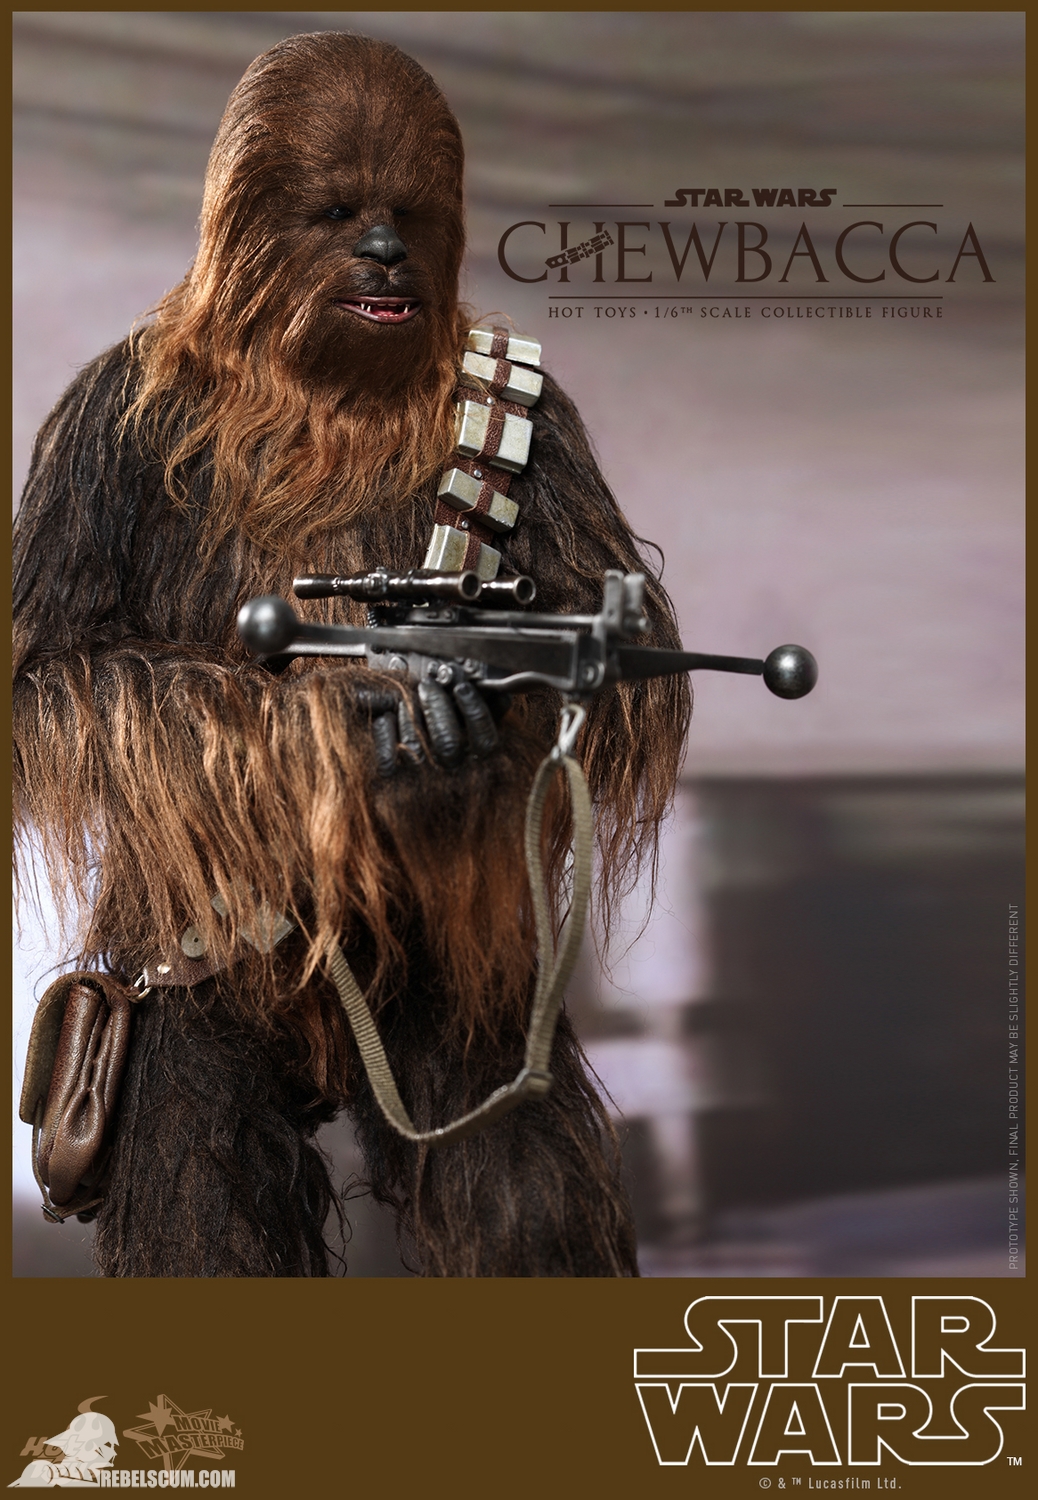 Hot-Toys-A-New-Hope-Chewbacca-Movie-Masterpiece-Series-011.jpg